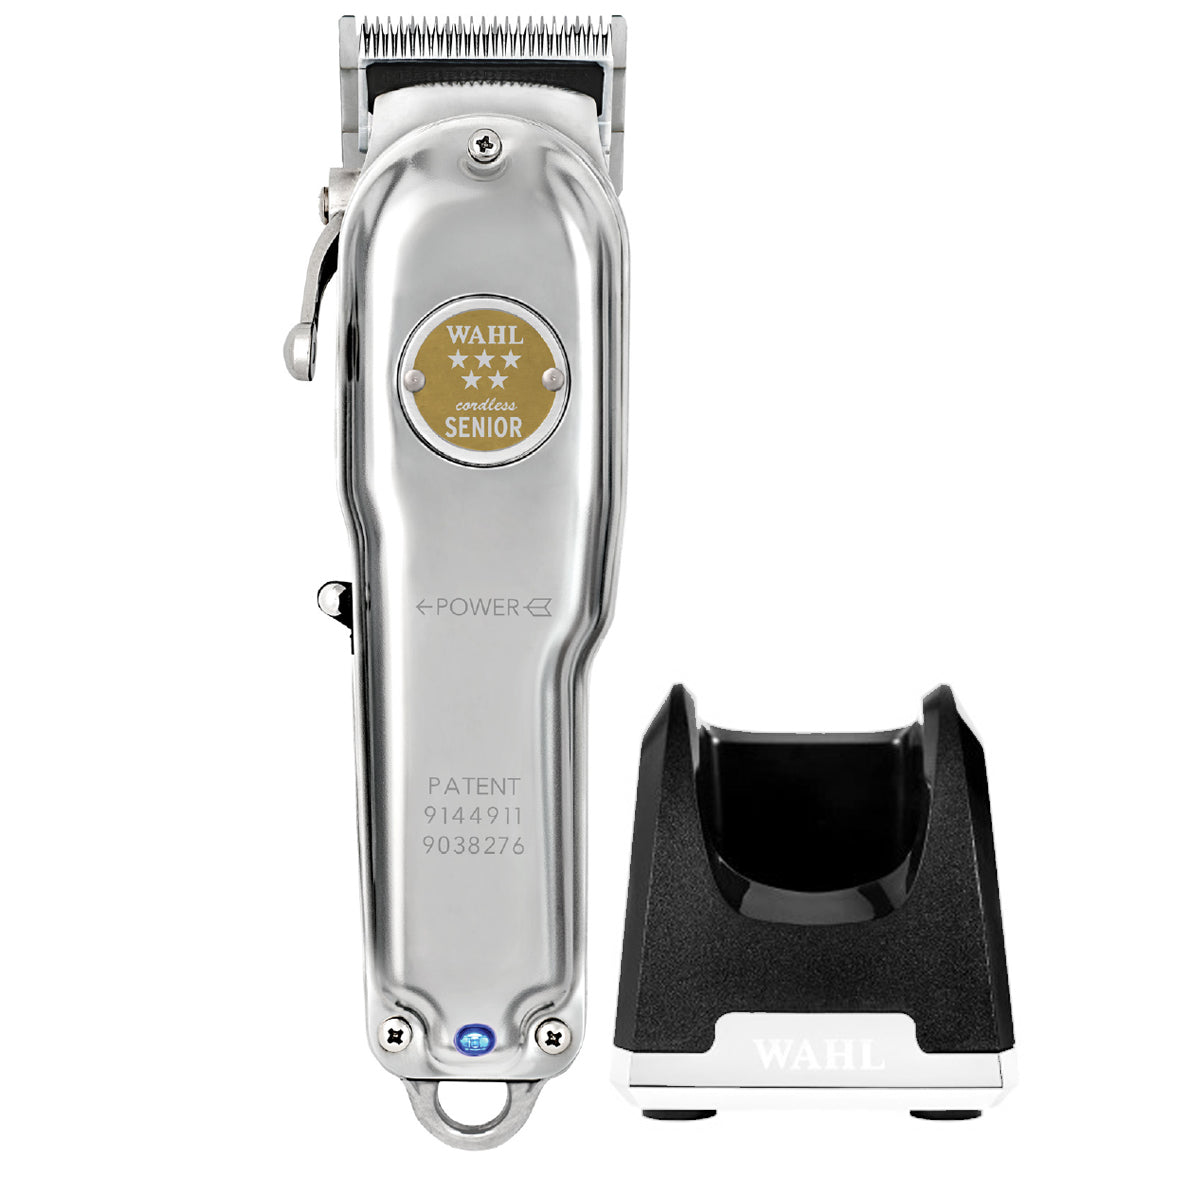 Wahl 5 Star Cordless Senior Clipper Metal Edition w/Charge Stand